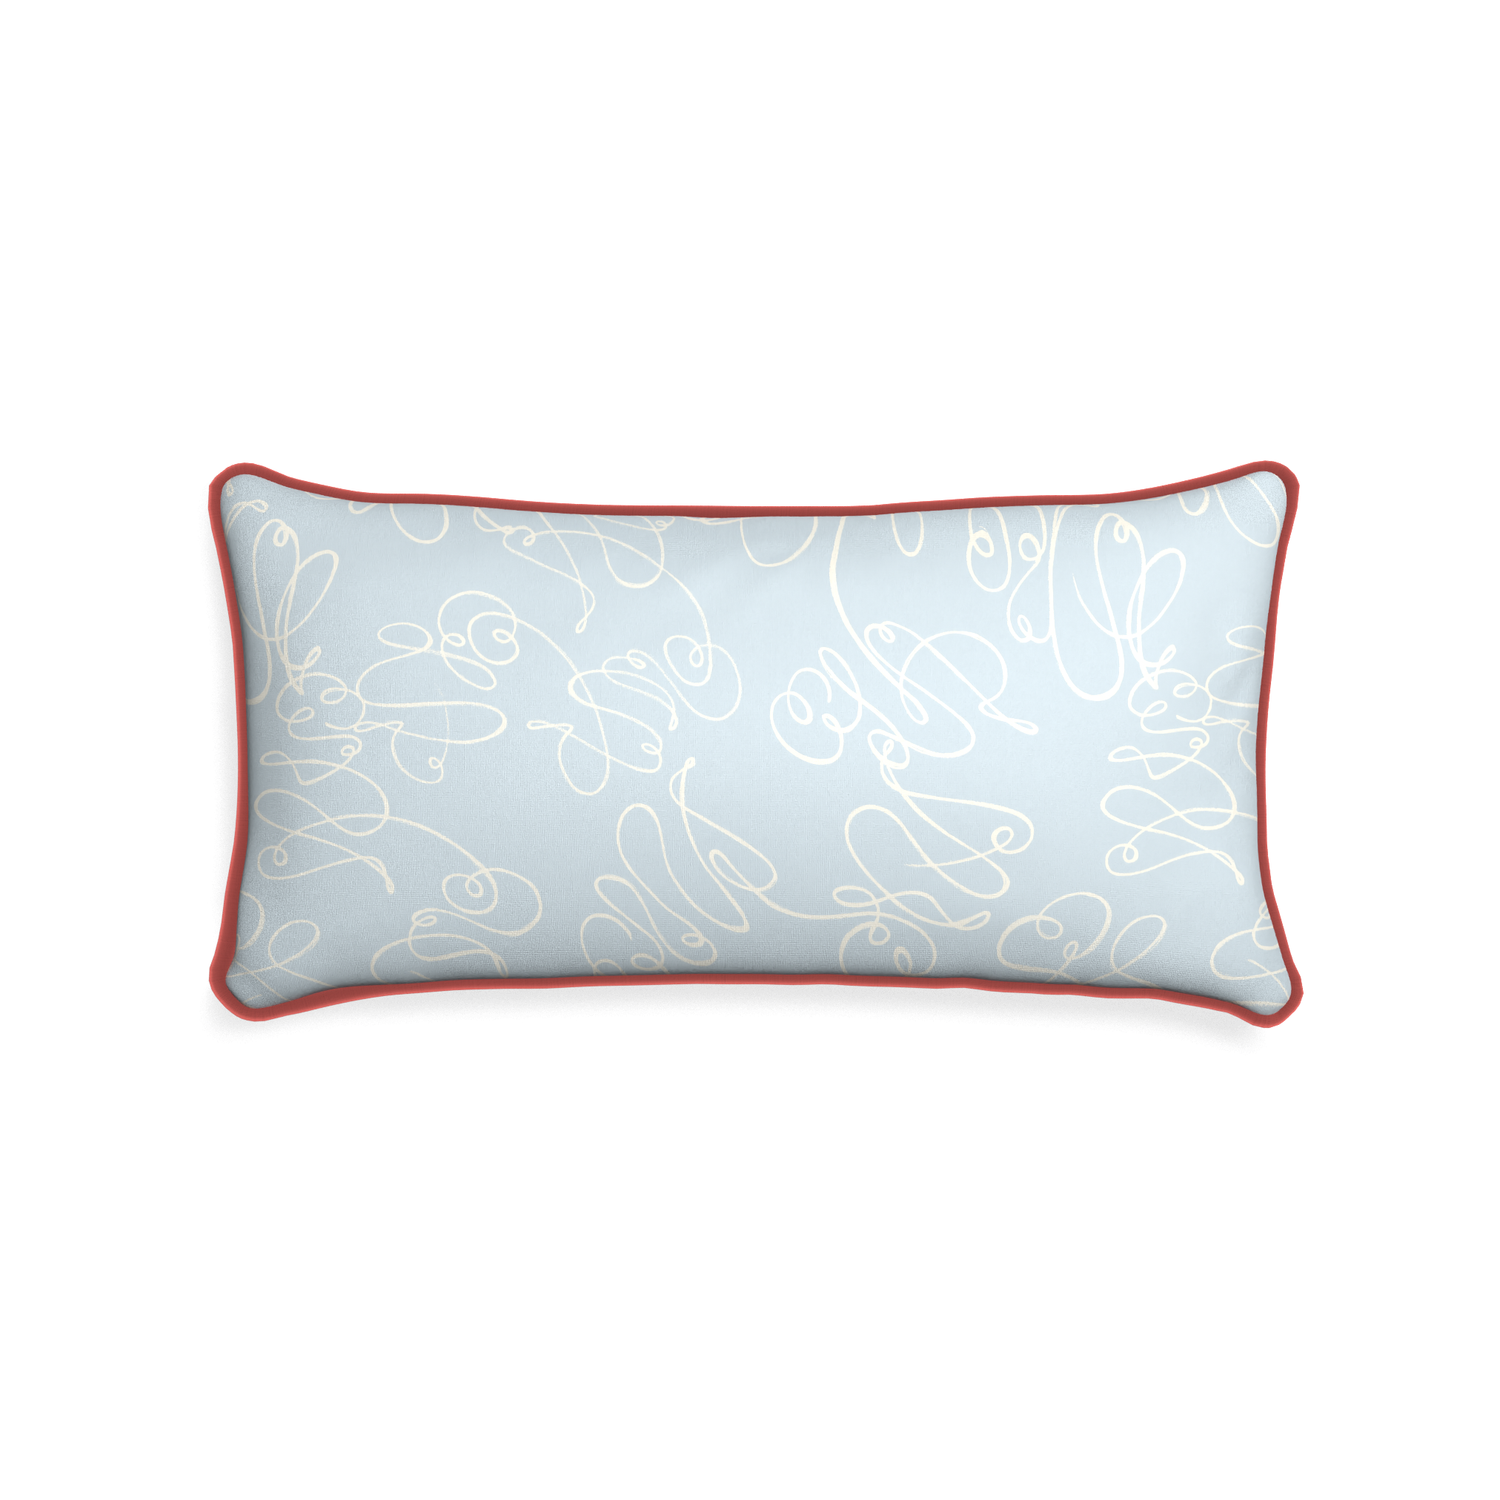 Midi-lumbar mirabella custom powder blue abstractpillow with c piping on white background